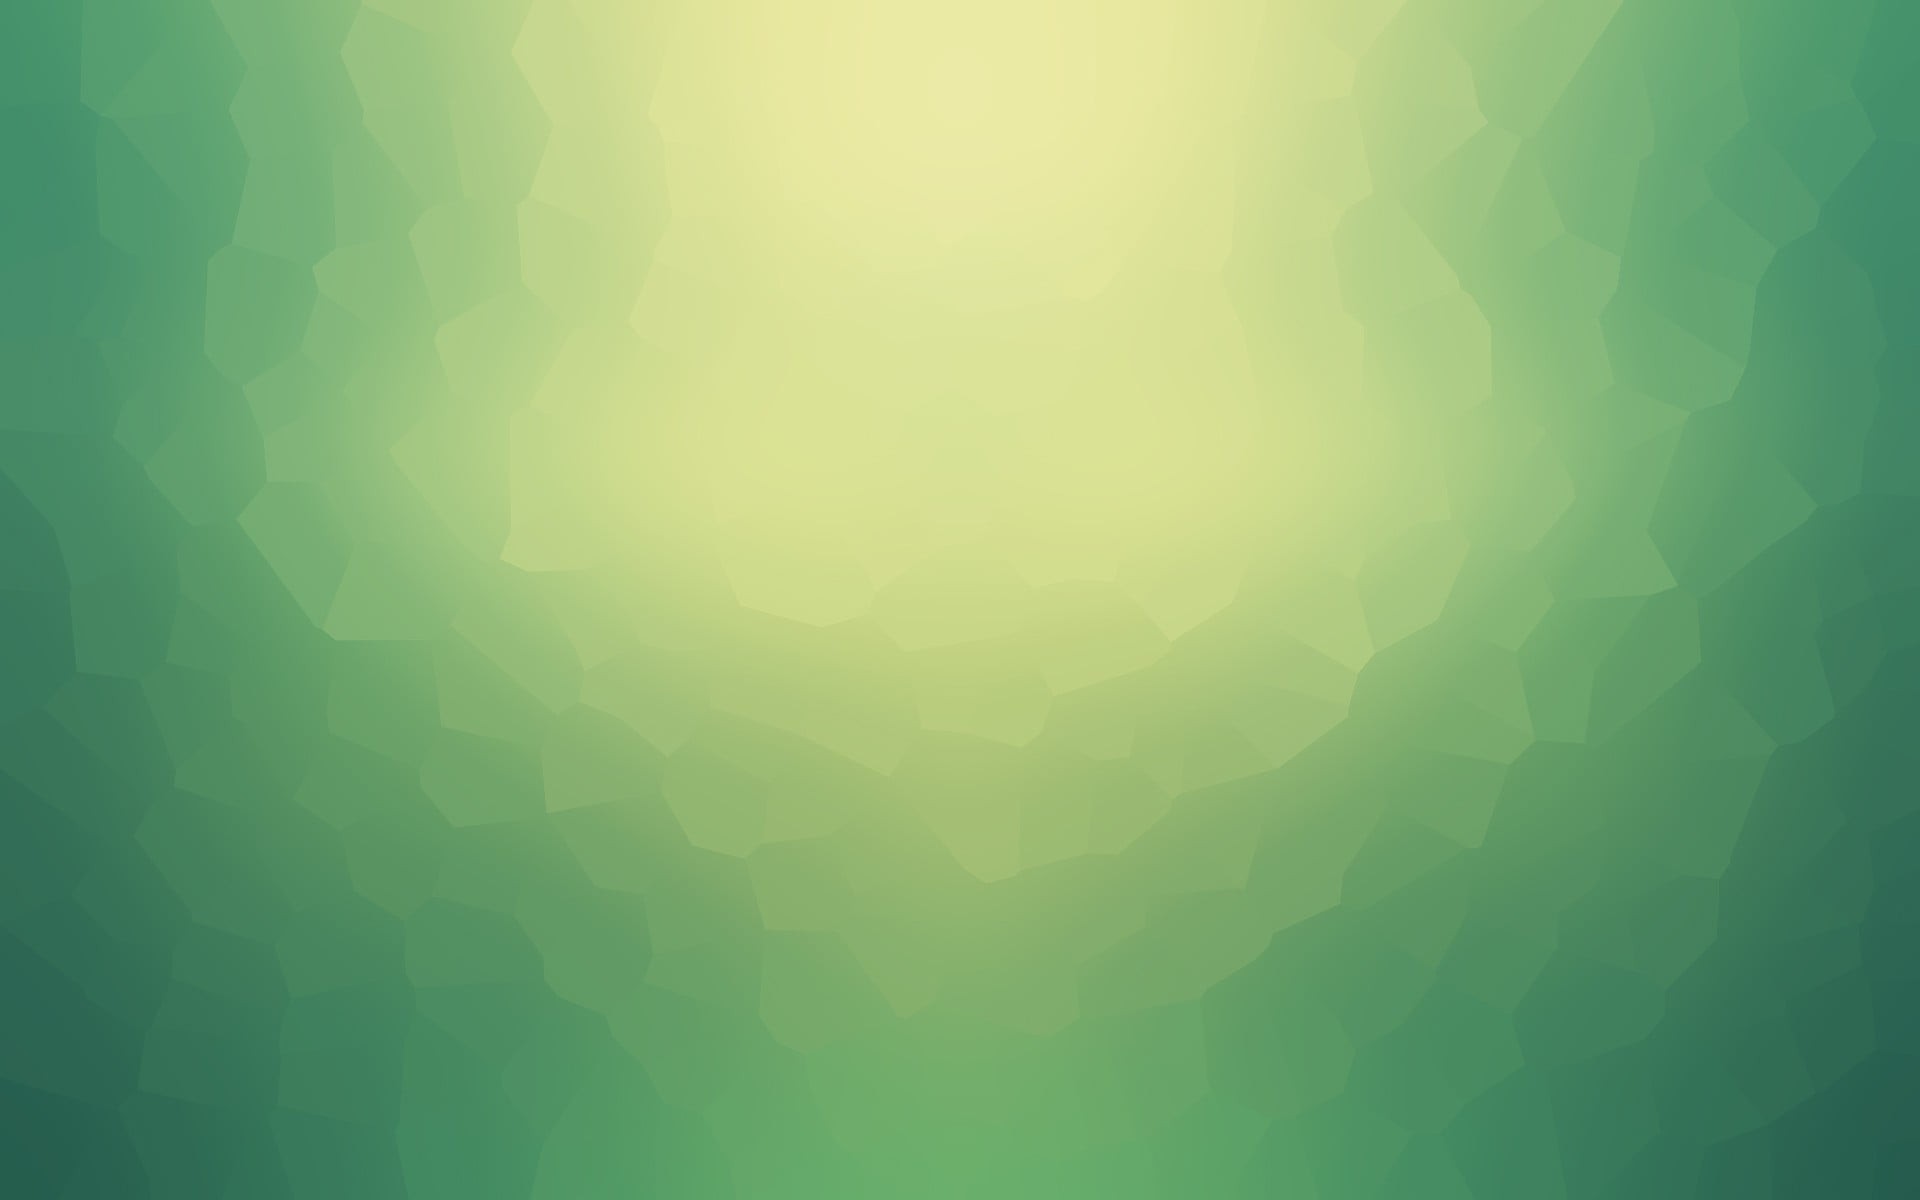 green wallpaper, low poly, gradient, green color, abstract, backgrounds